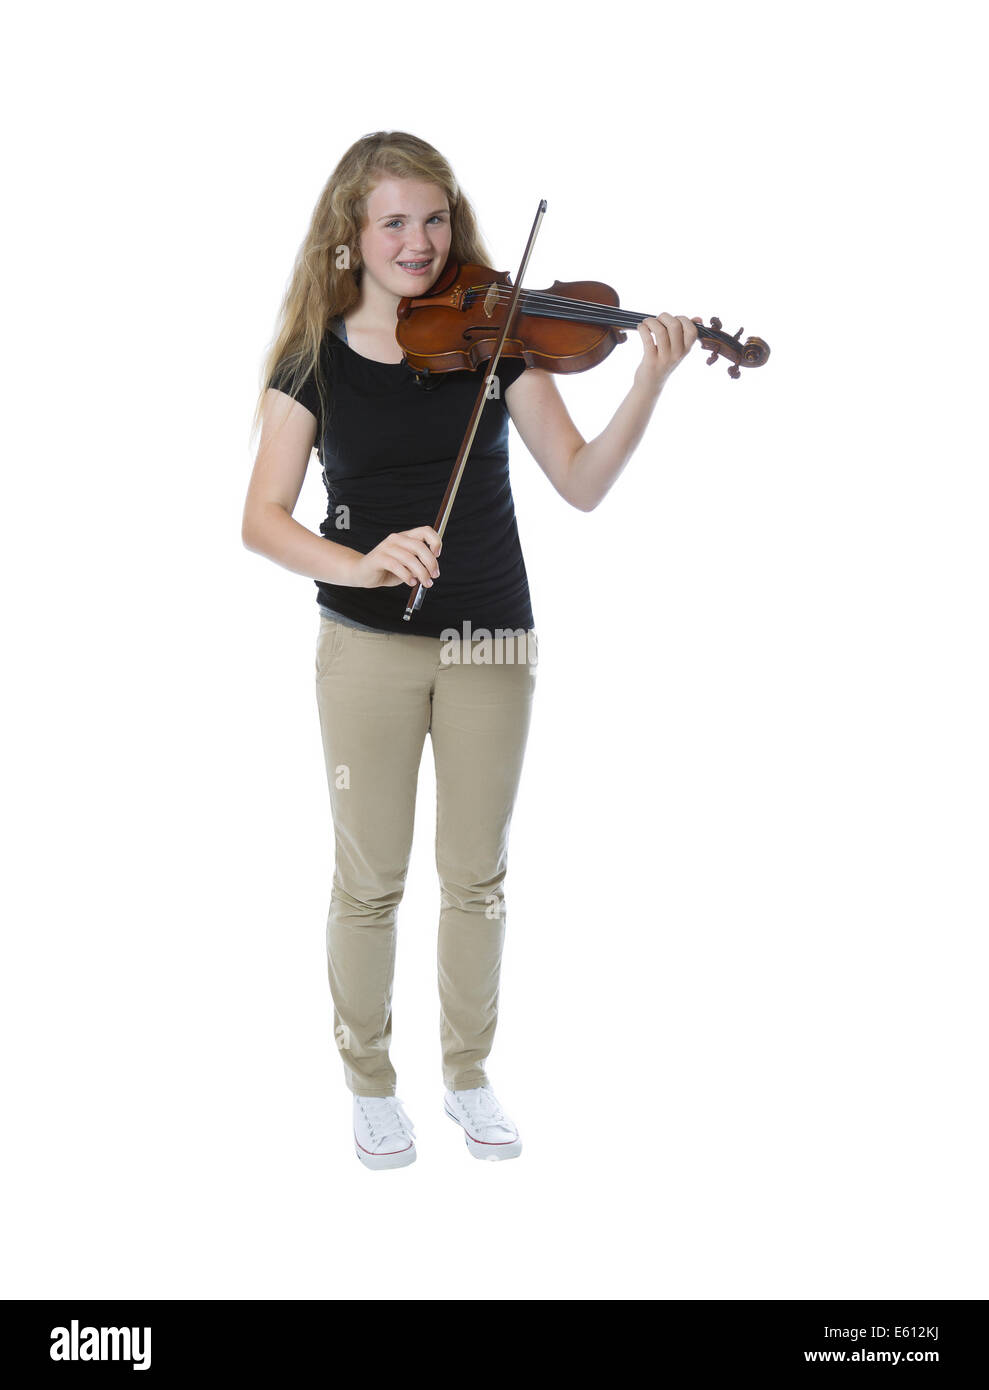 Full body front view of a pretty young teenage girl playing violin isolated on white Stock Photo